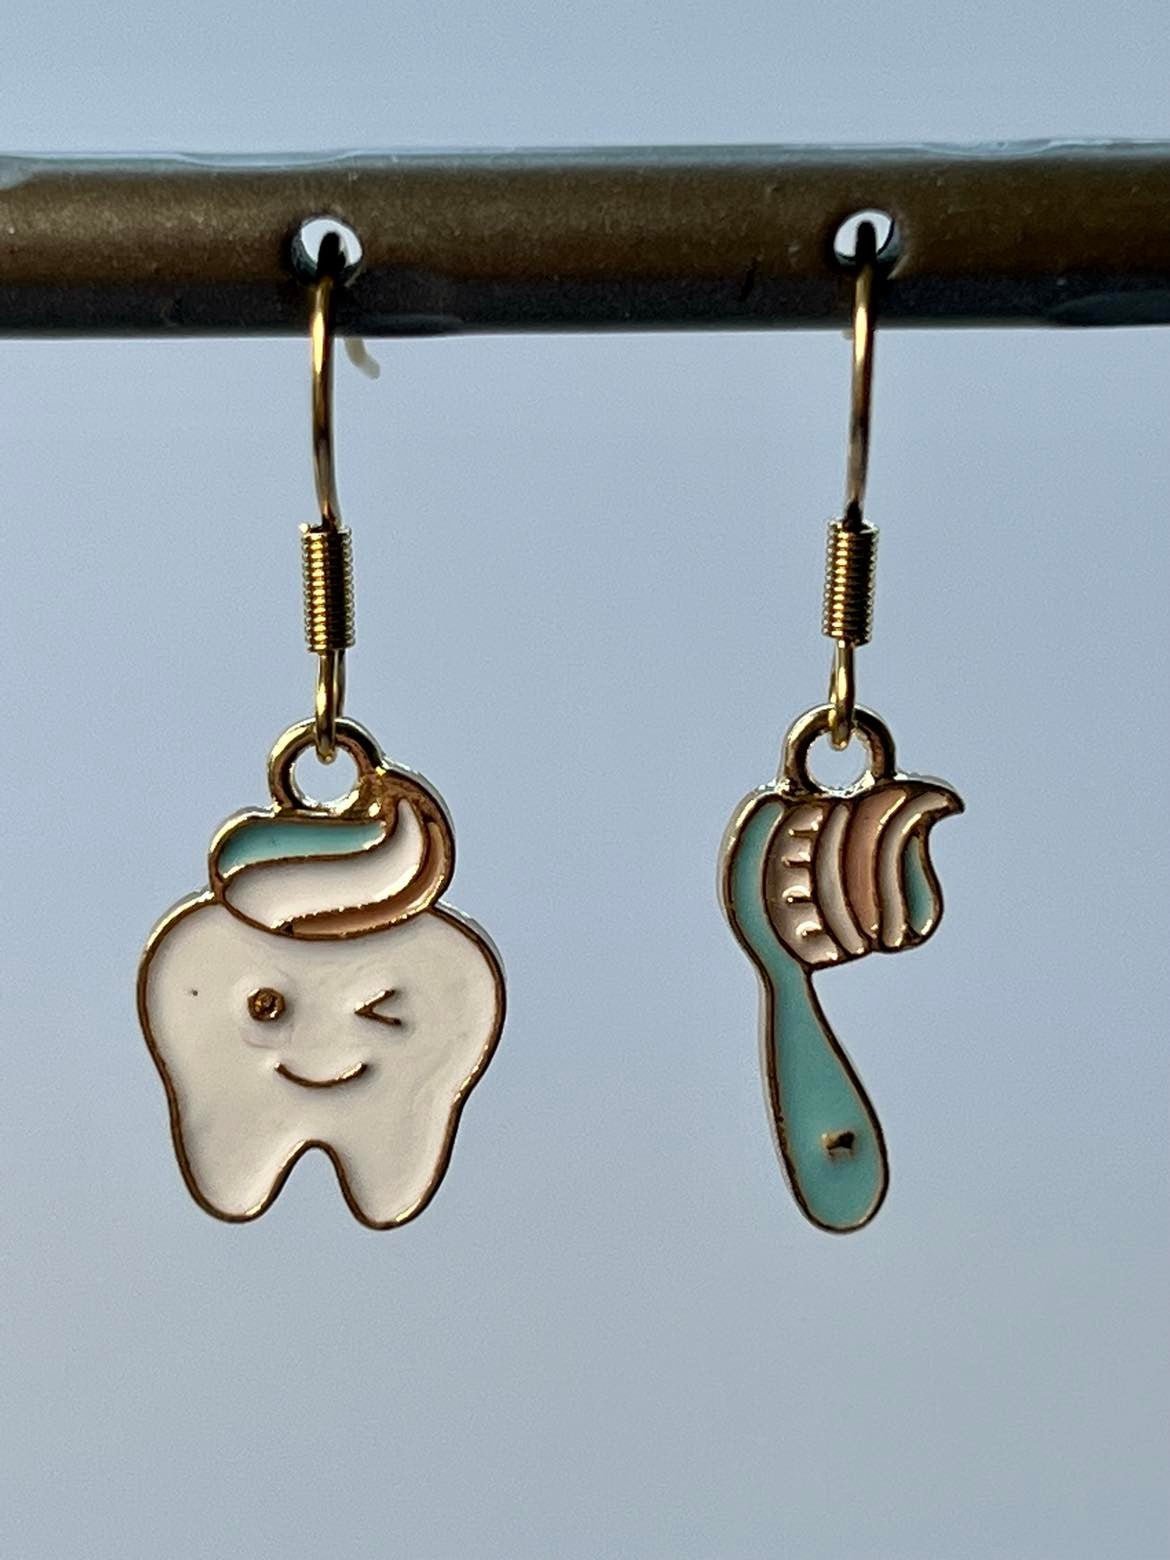 Cute Funny Toothbrush and Tooth Dangle Hook Earrings - CYR'S CREATIONS